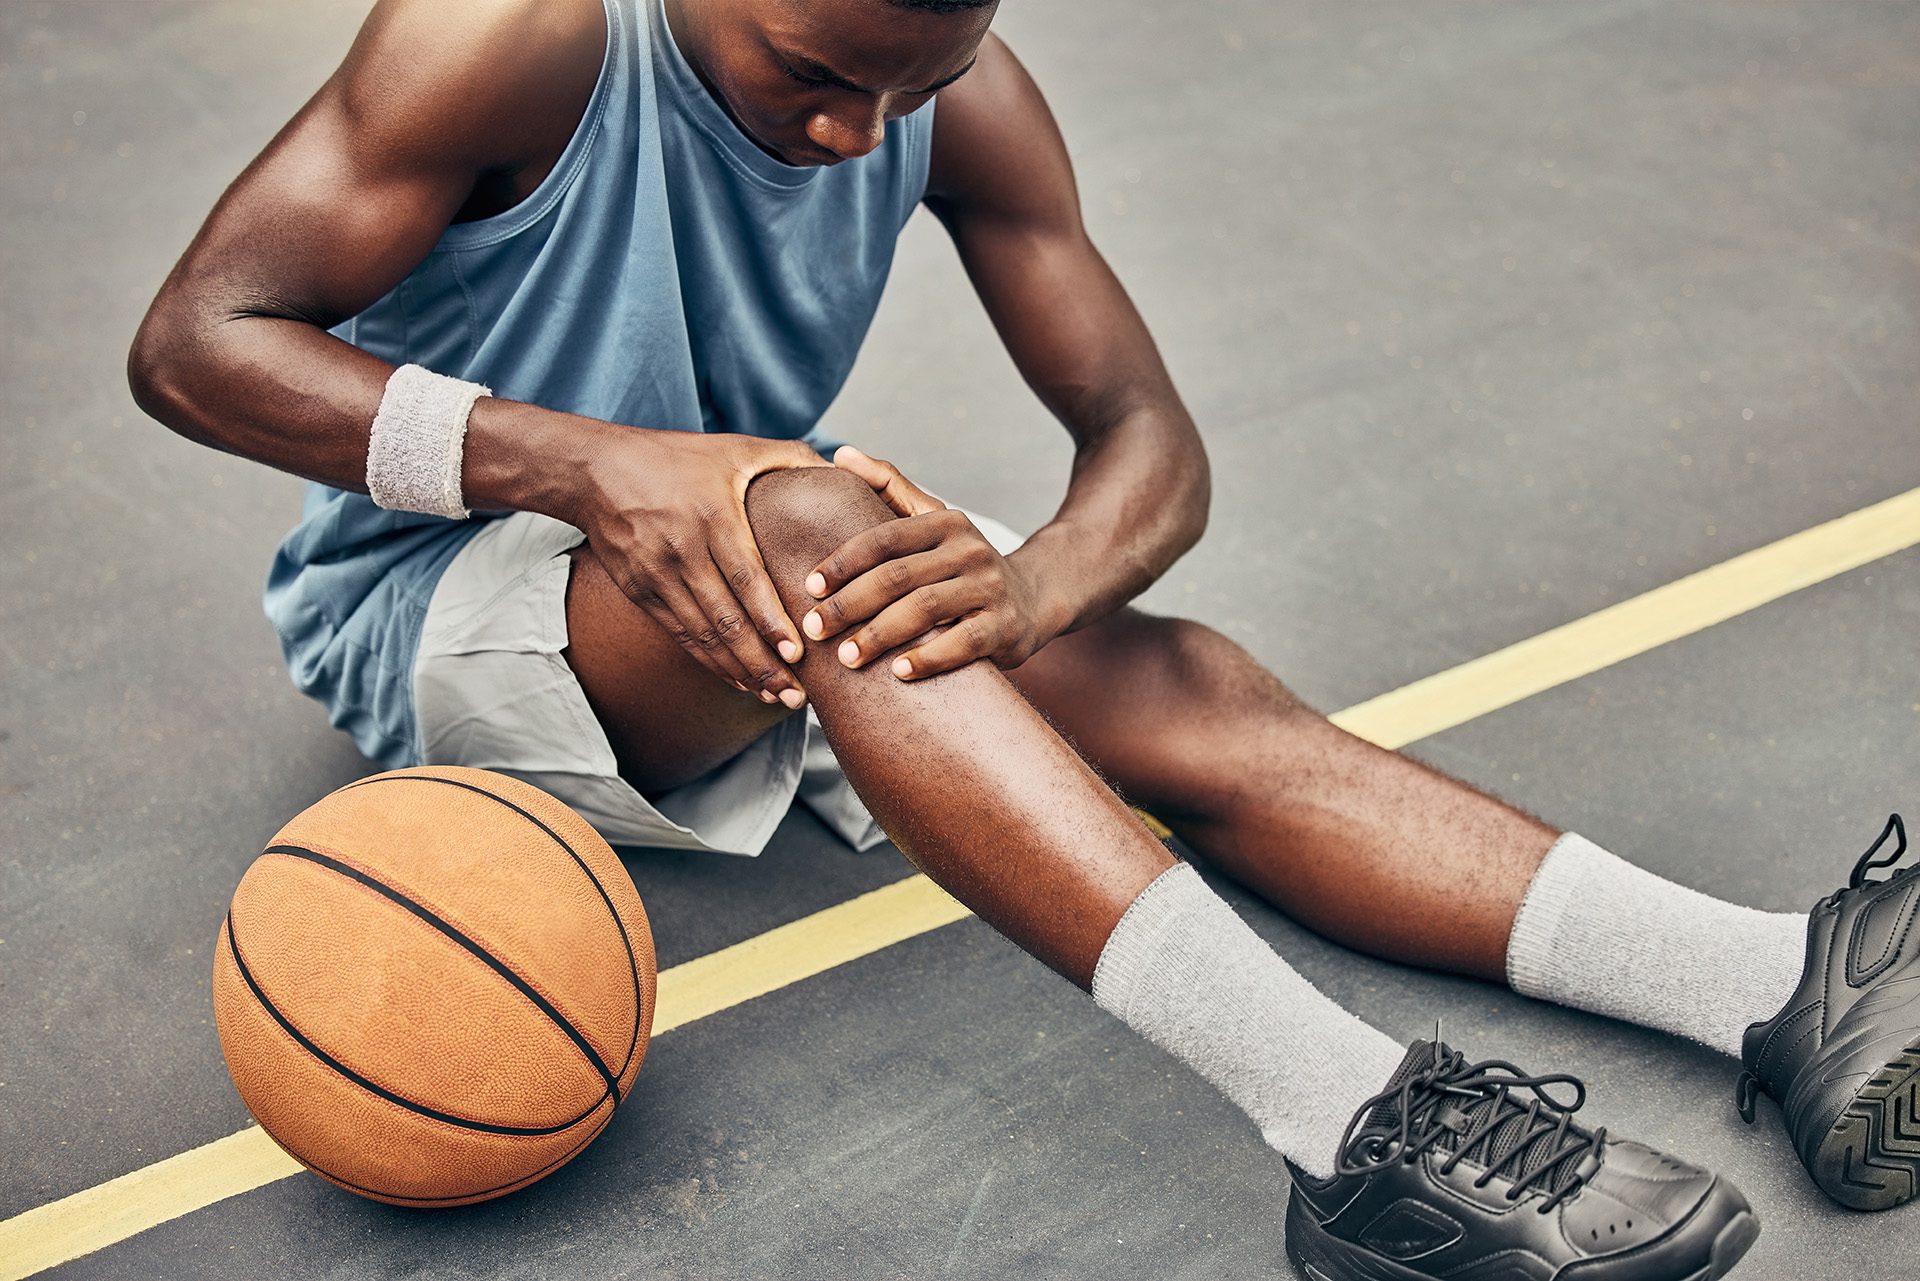 Fitness,,Basketball,Knee,Injury,Or,Pain,While,On,Basketball,Court